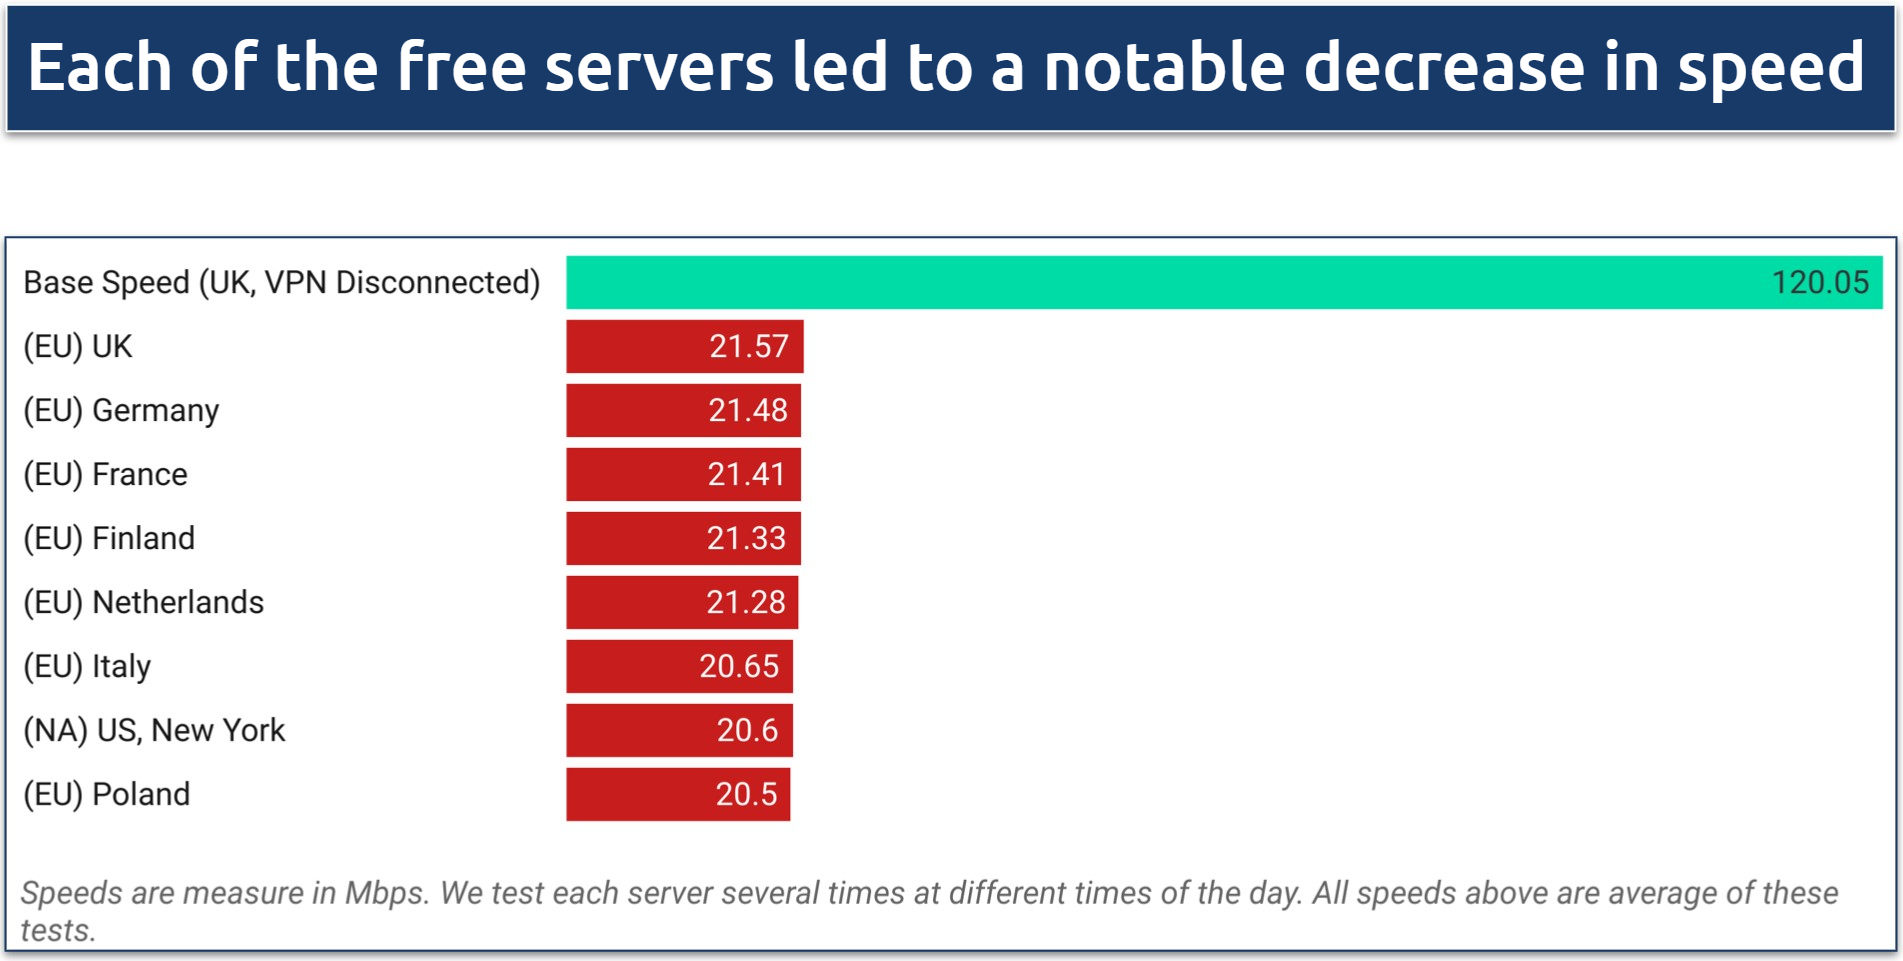 A screenshot showing AdGuard VPN's speed results for the free tier across servers in Europe and North America